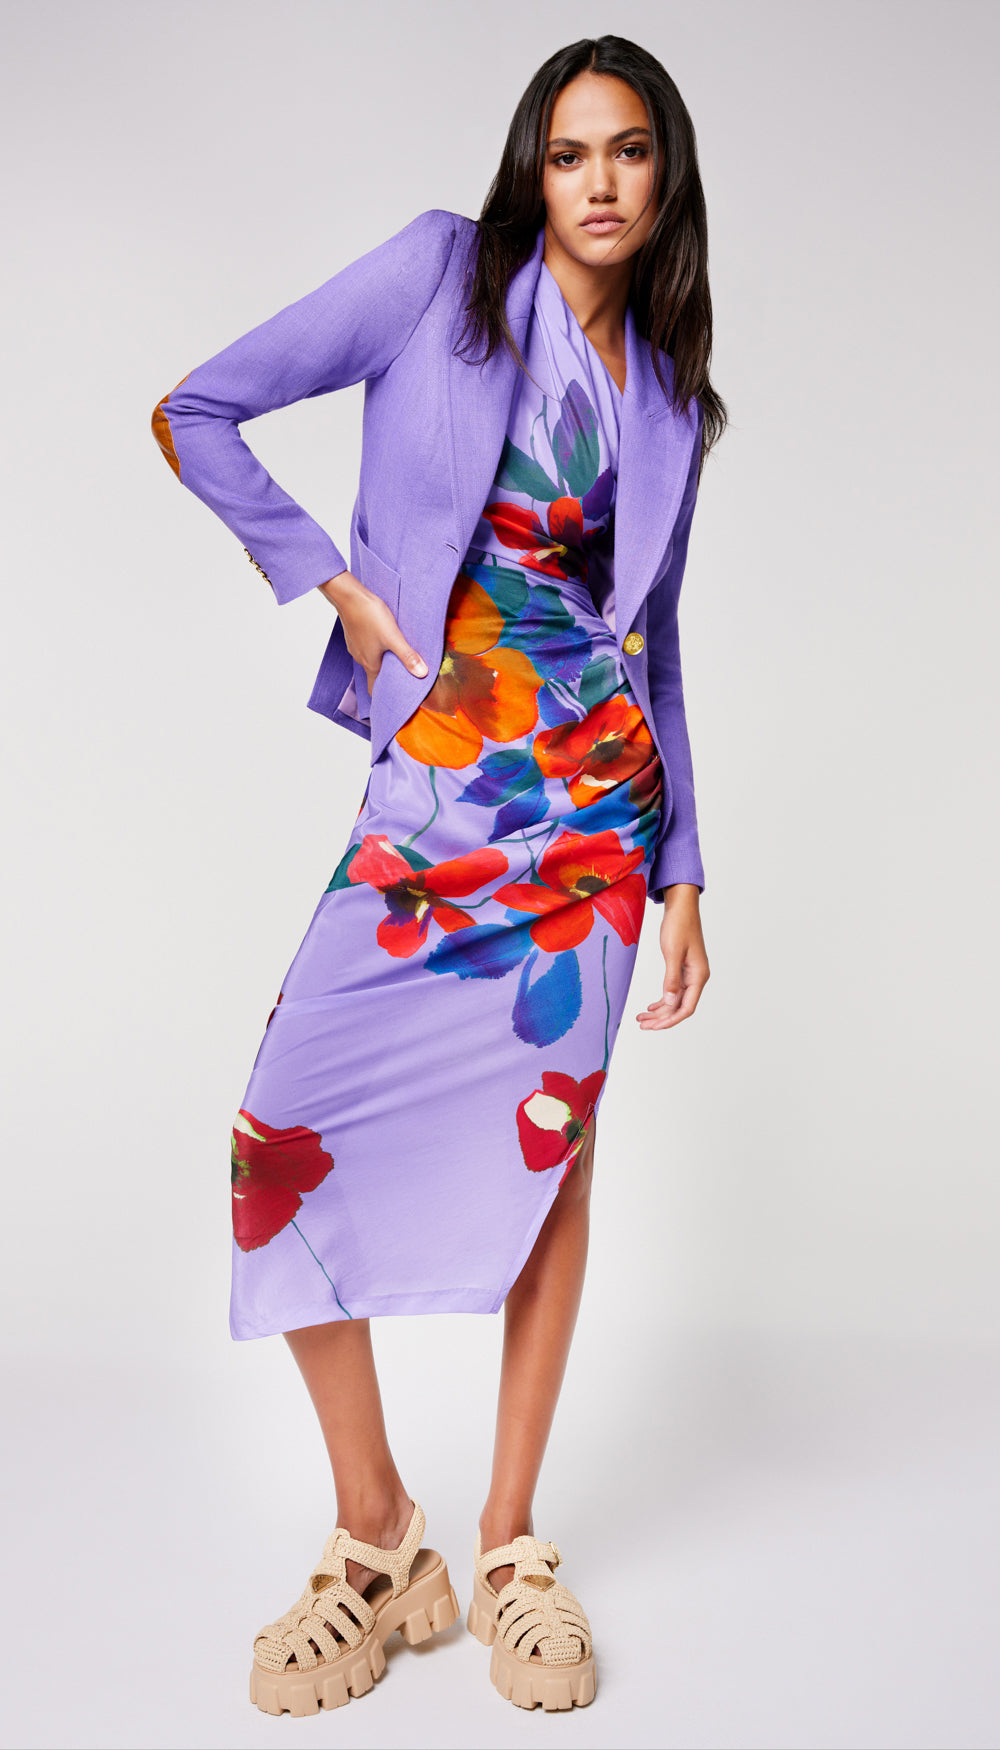 A woman in a solid purple blazer layered over a floral dress.